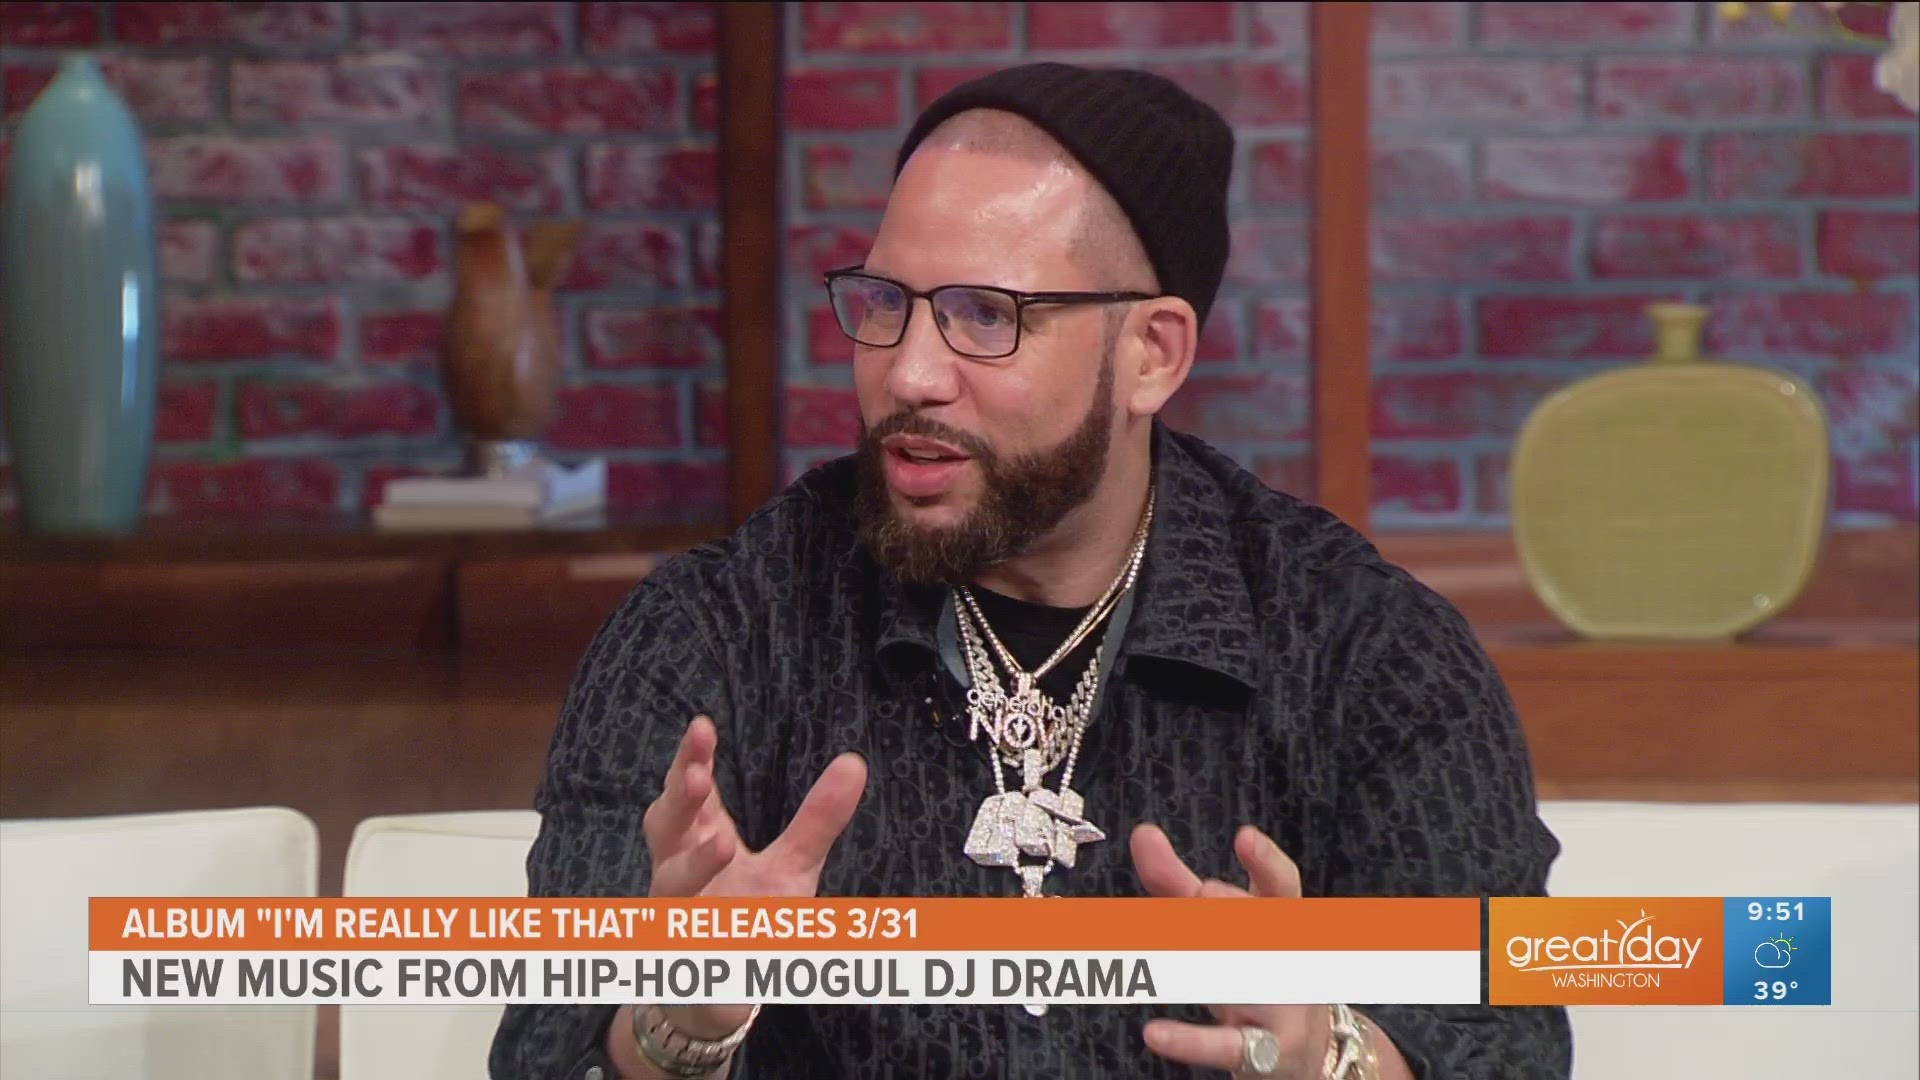 Grammy-Winning Producer & Music Executive, DJ Drama stops by the Great Day Studios ahead of the release of his latest album "I'm Really Like That".